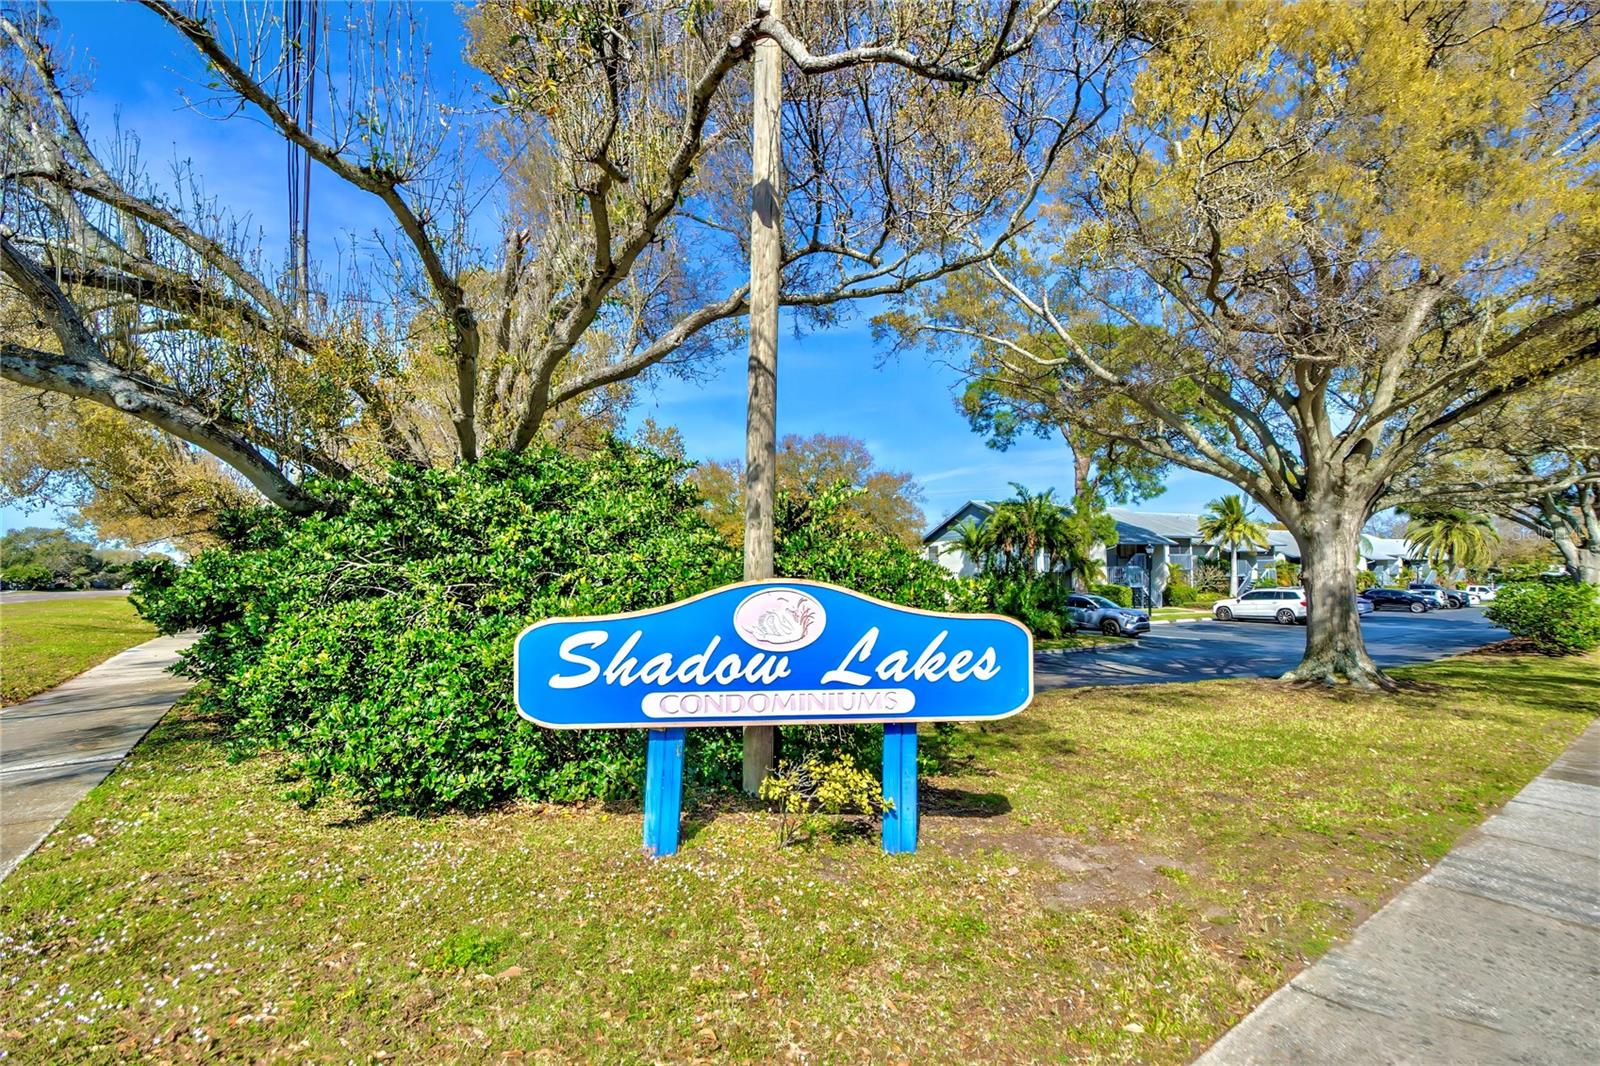 SHADOW LAKES CONDO- centrally located a short drive from shopping, dining, parks, airport- everything you need!